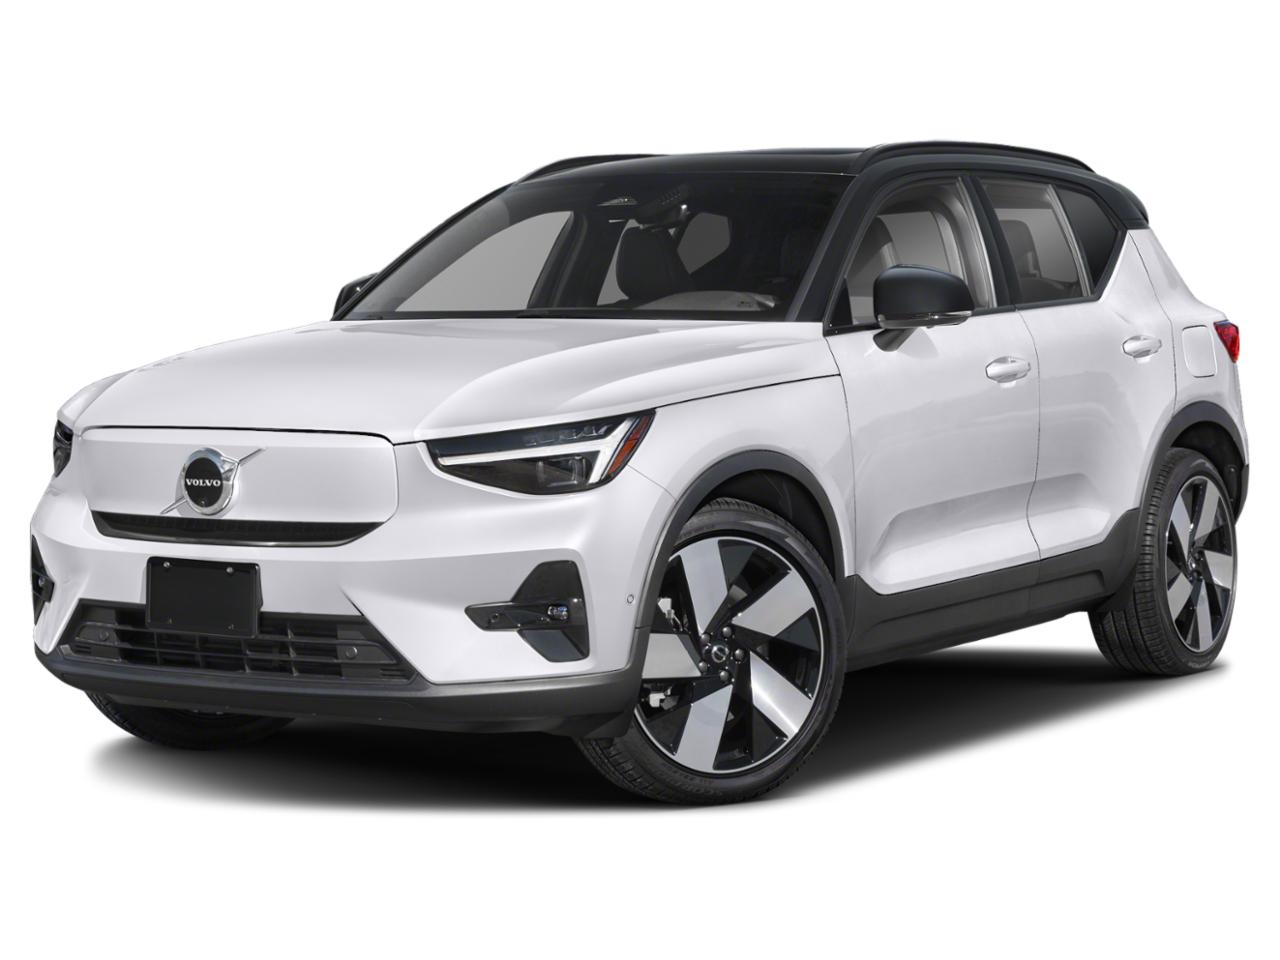 2023 Volvo XC40 Recharge Pure Electric Vehicle Photo in Grapevine, TX 76051